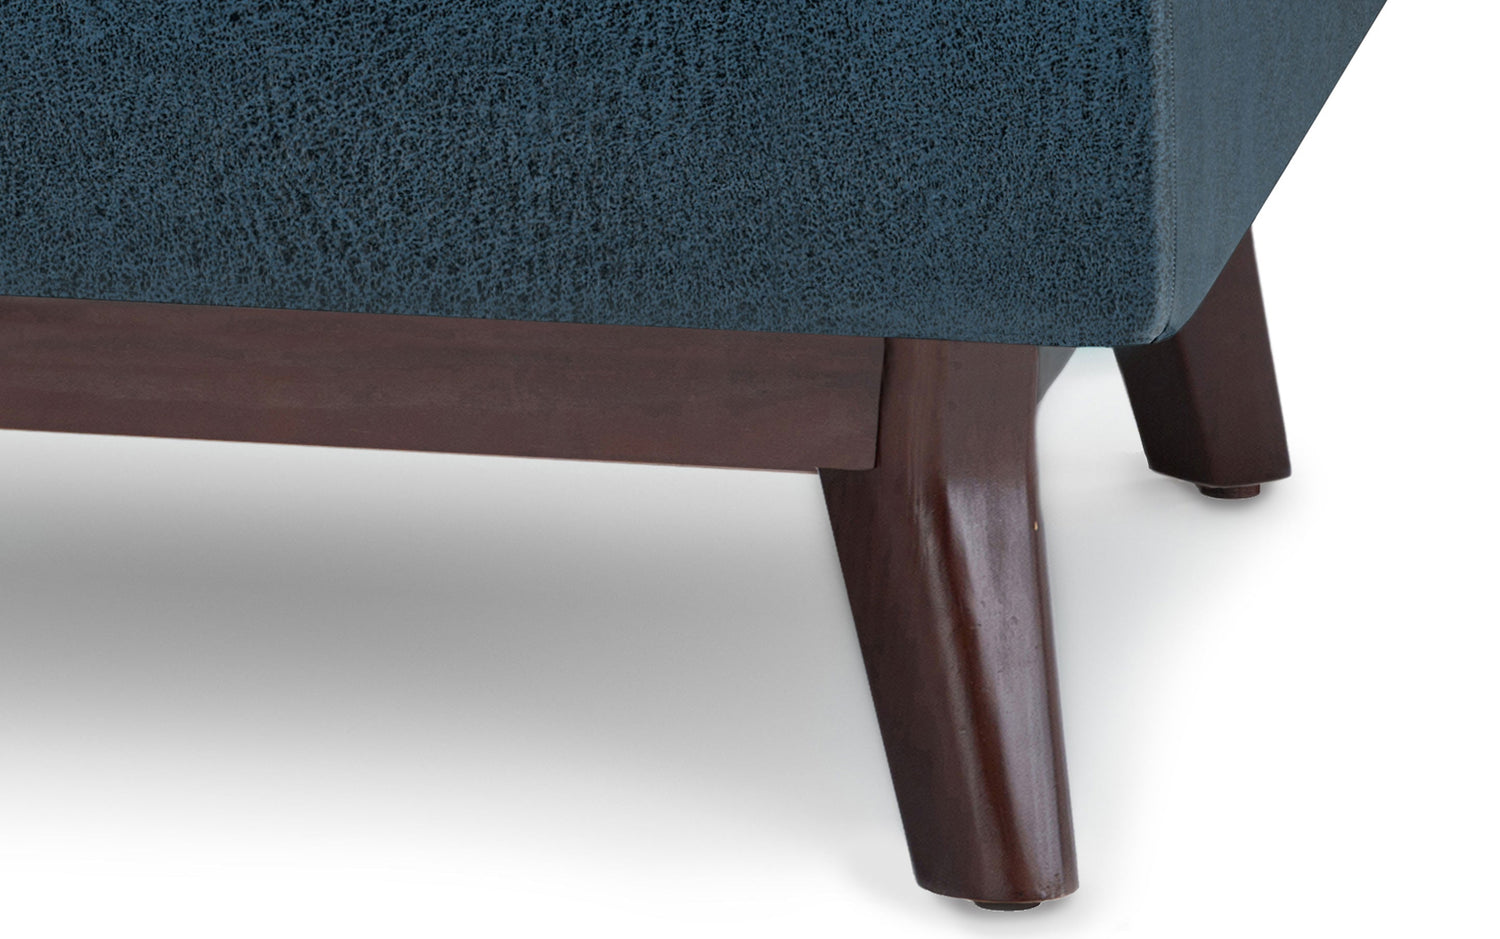 Distressed Dark Blue Distressed Vegan Leather | Owen Small Coffee Table Ottoman in Distressed Vegan Leather